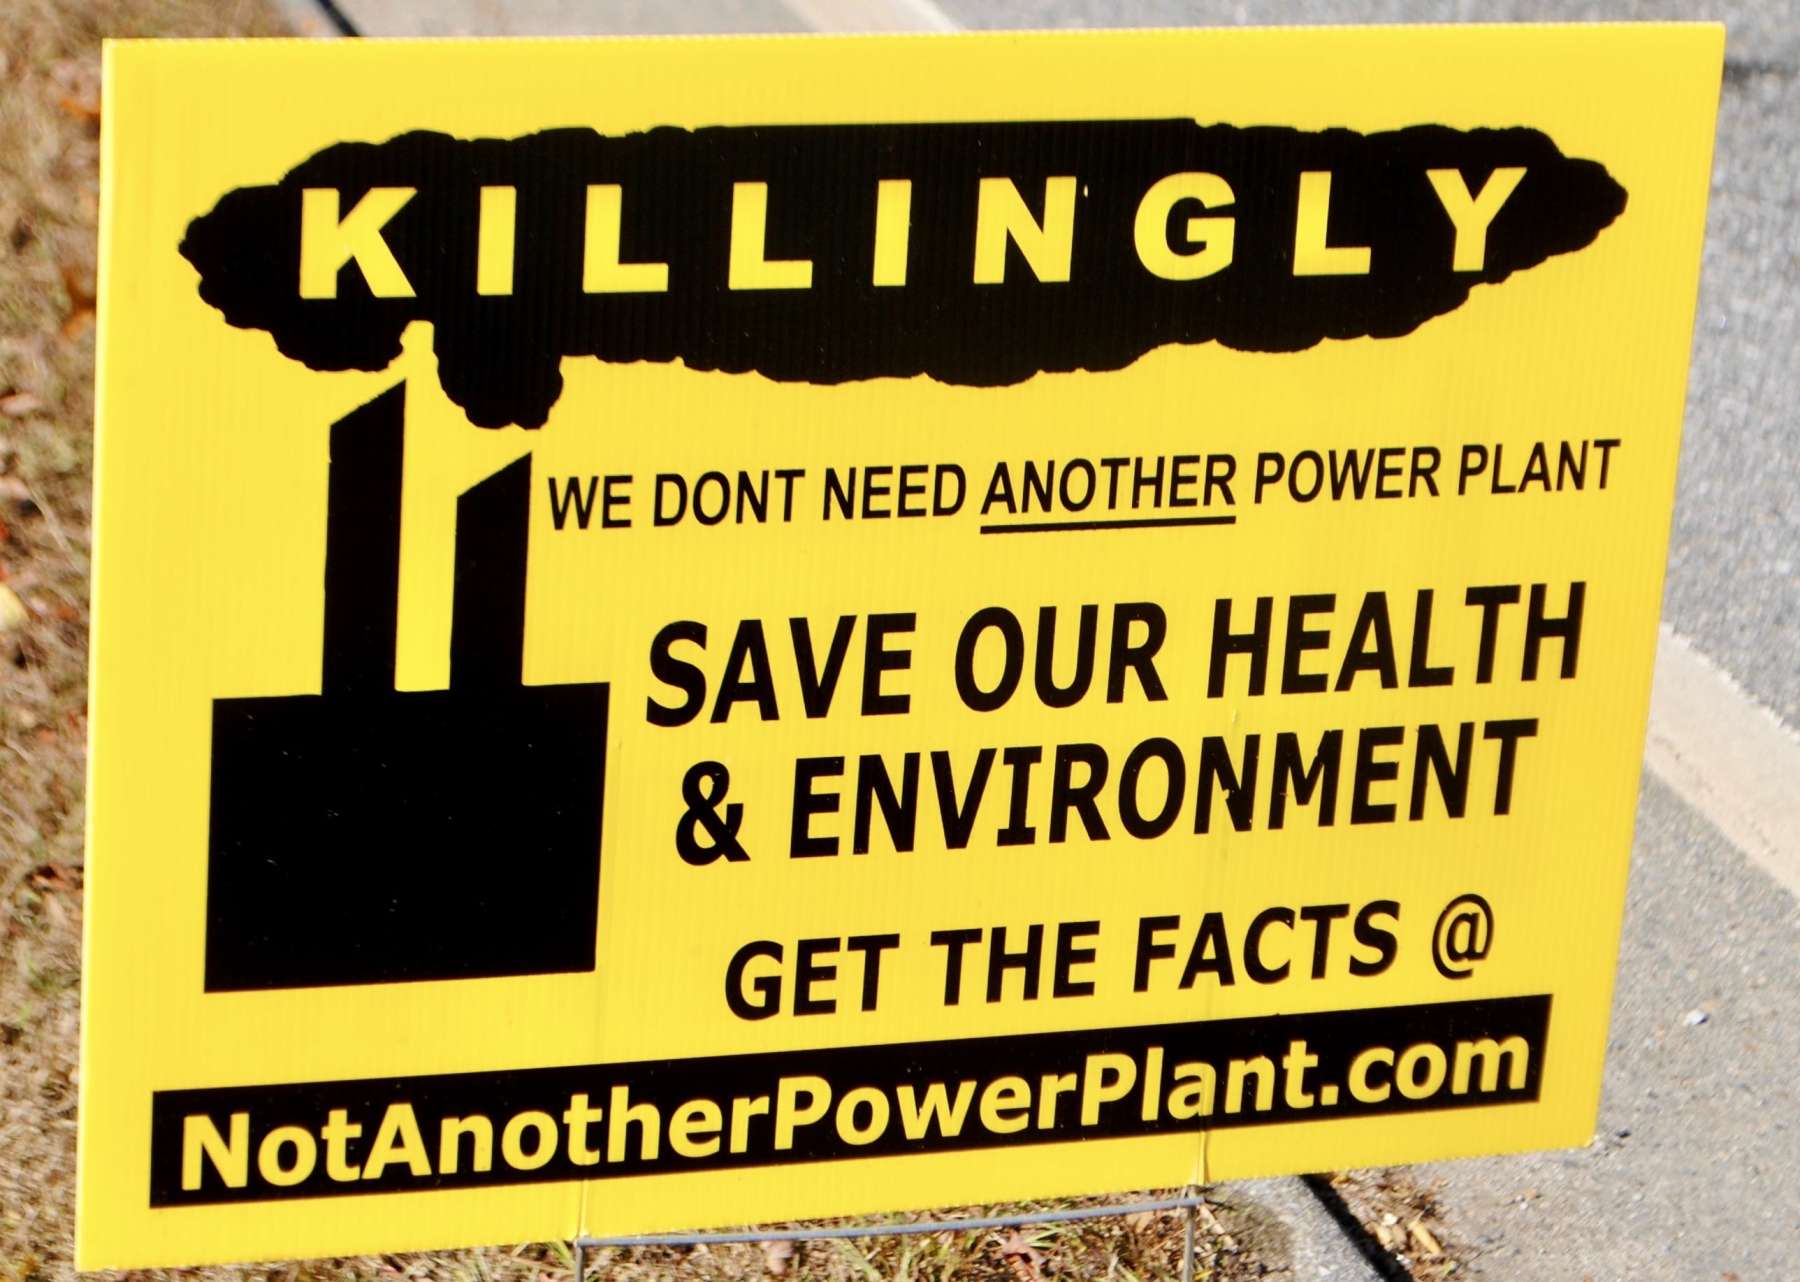 Rhode Island News: From Burrillville to Killingly: No more fossil fuel power plants!